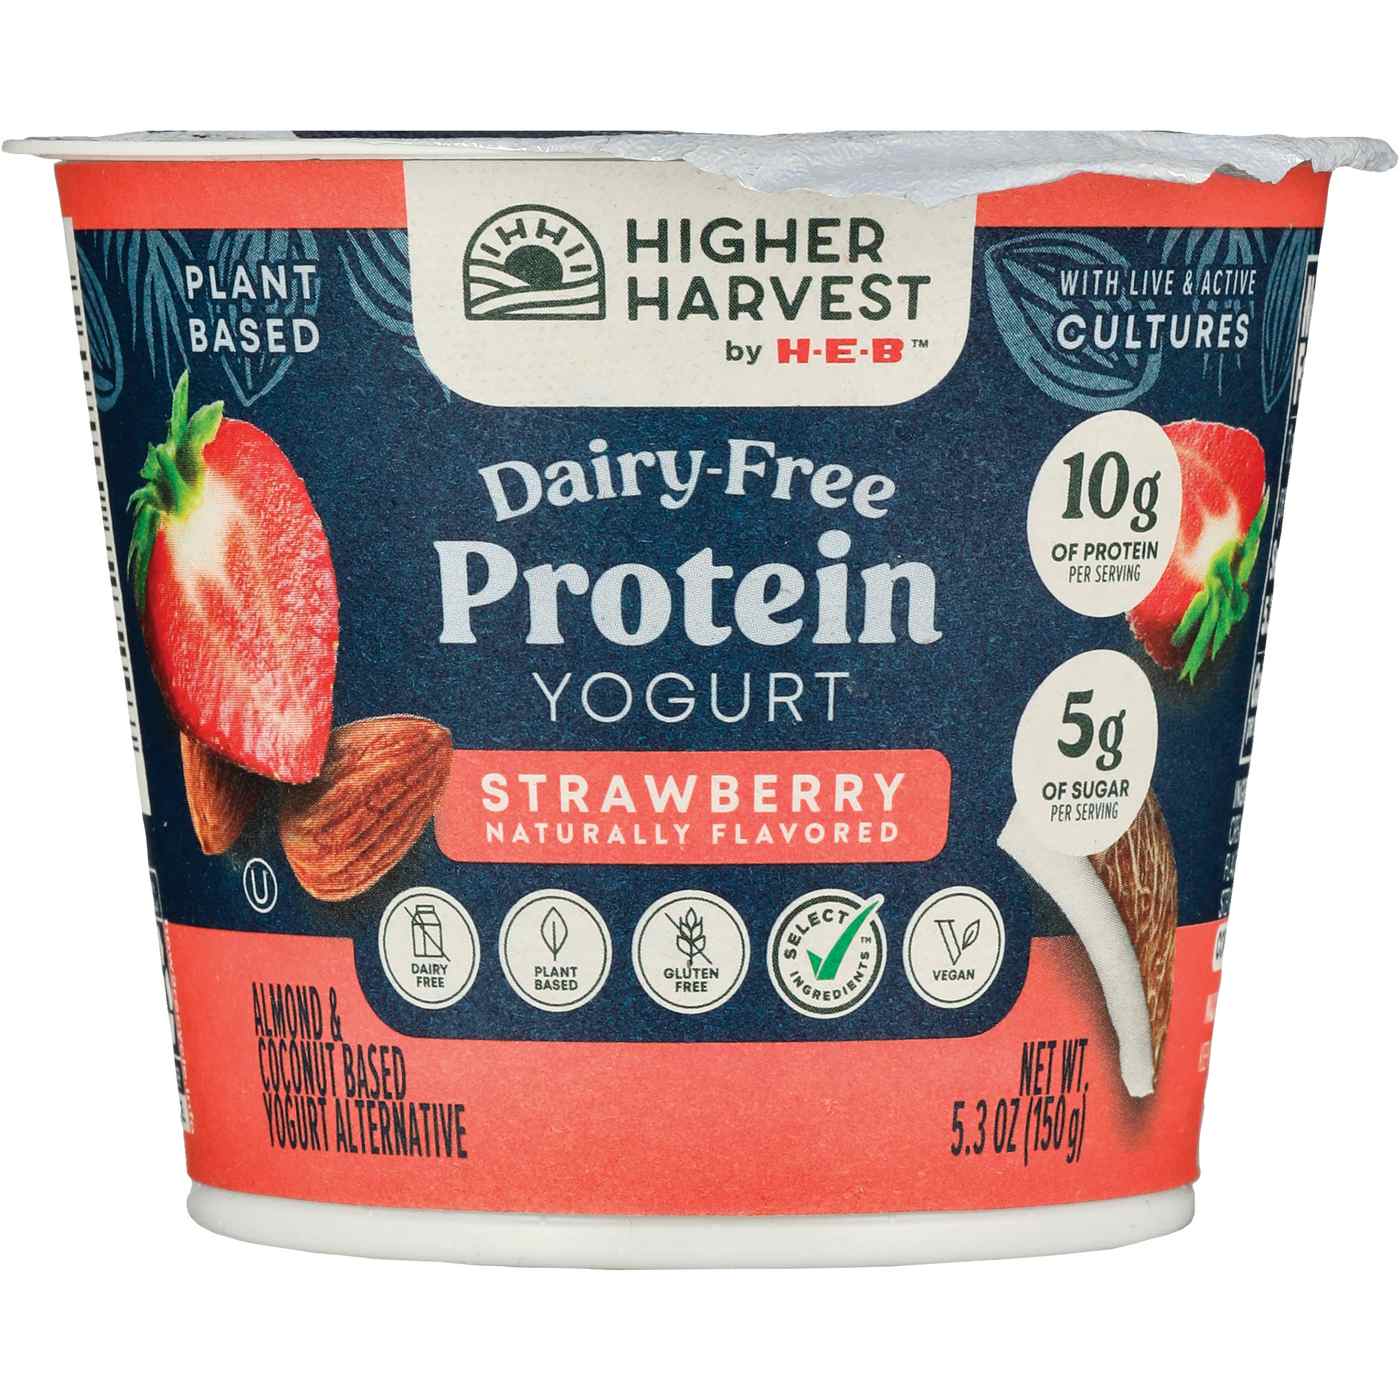 Higher Harvest by H-E-B Dairy-Free 10g Protein Yogurt – Strawberry; image 1 of 3